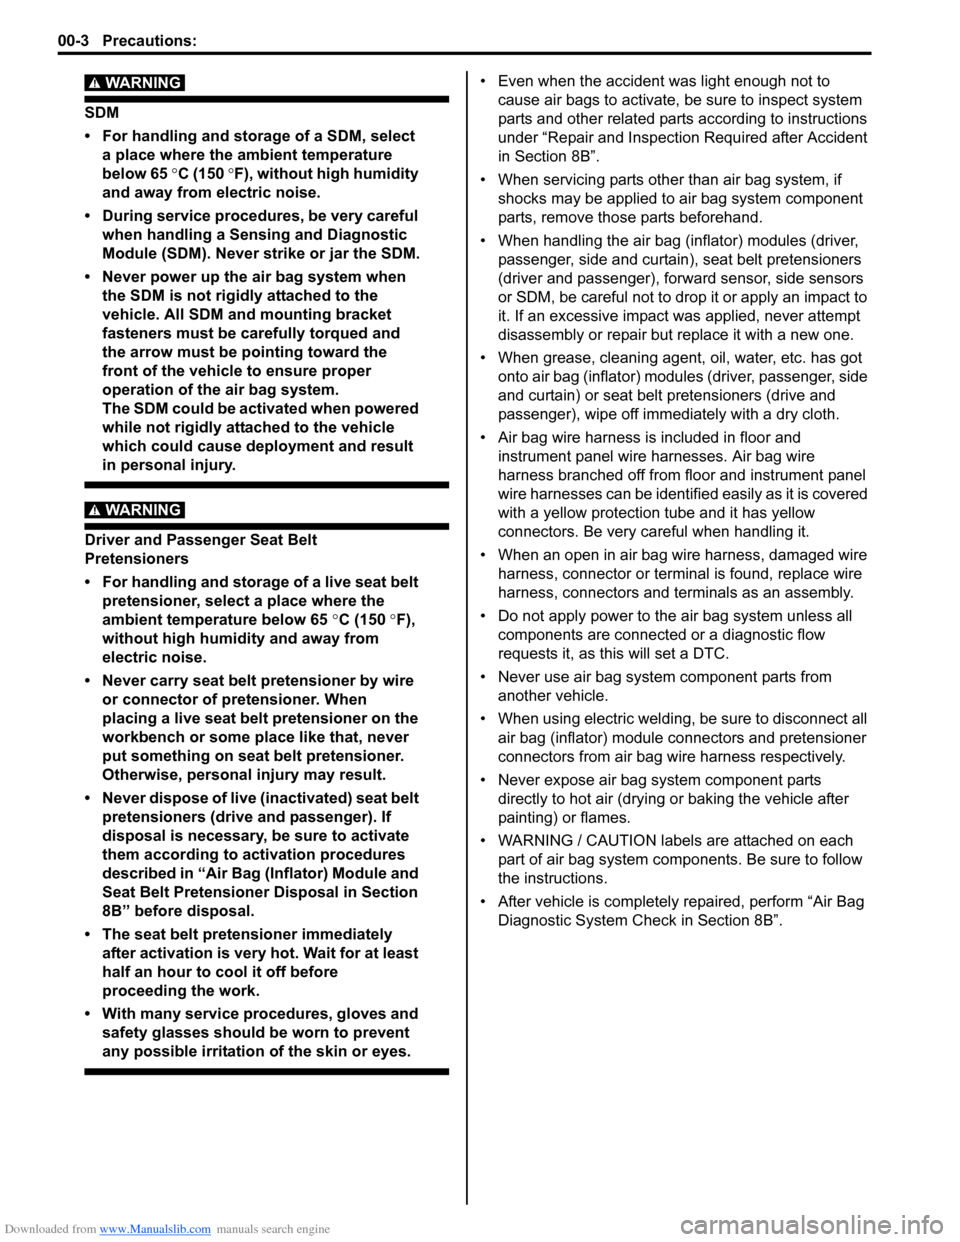 SUZUKI SWIFT 2007 2.G Service Workshop Manual Downloaded from www.Manualslib.com manuals search engine 00-3 Precautions: 
WARNING! 
SDM
• For handling and storage of a SDM, select a place where the ambient temperature 
below 65  °C (150  °F),